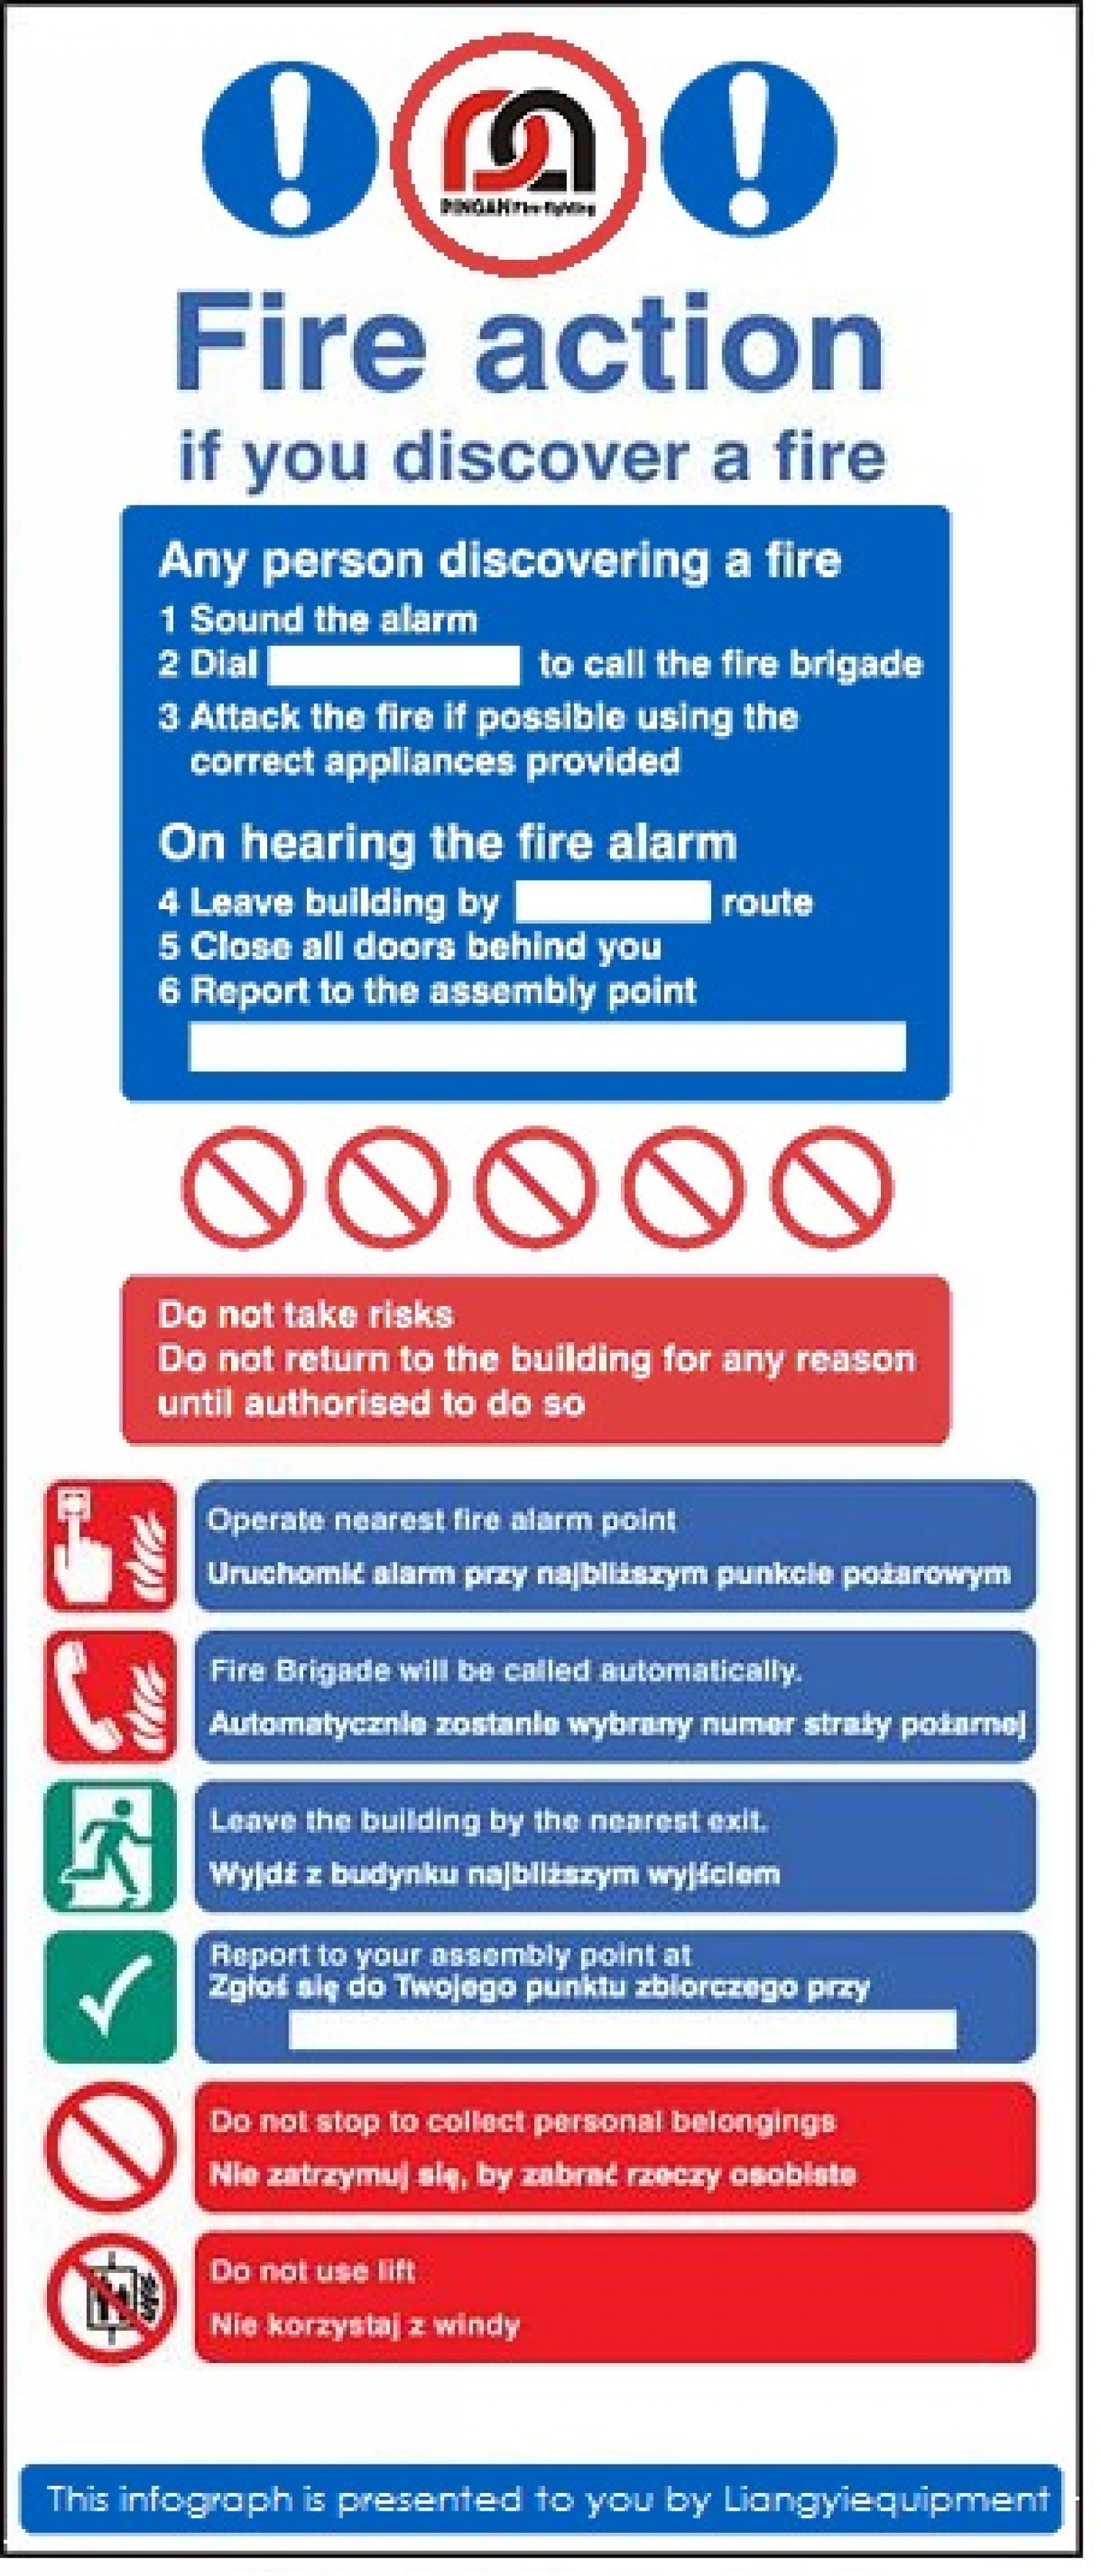 FIRE ACTION SIGNS FOR FIRE SAFETY | Visual.ly